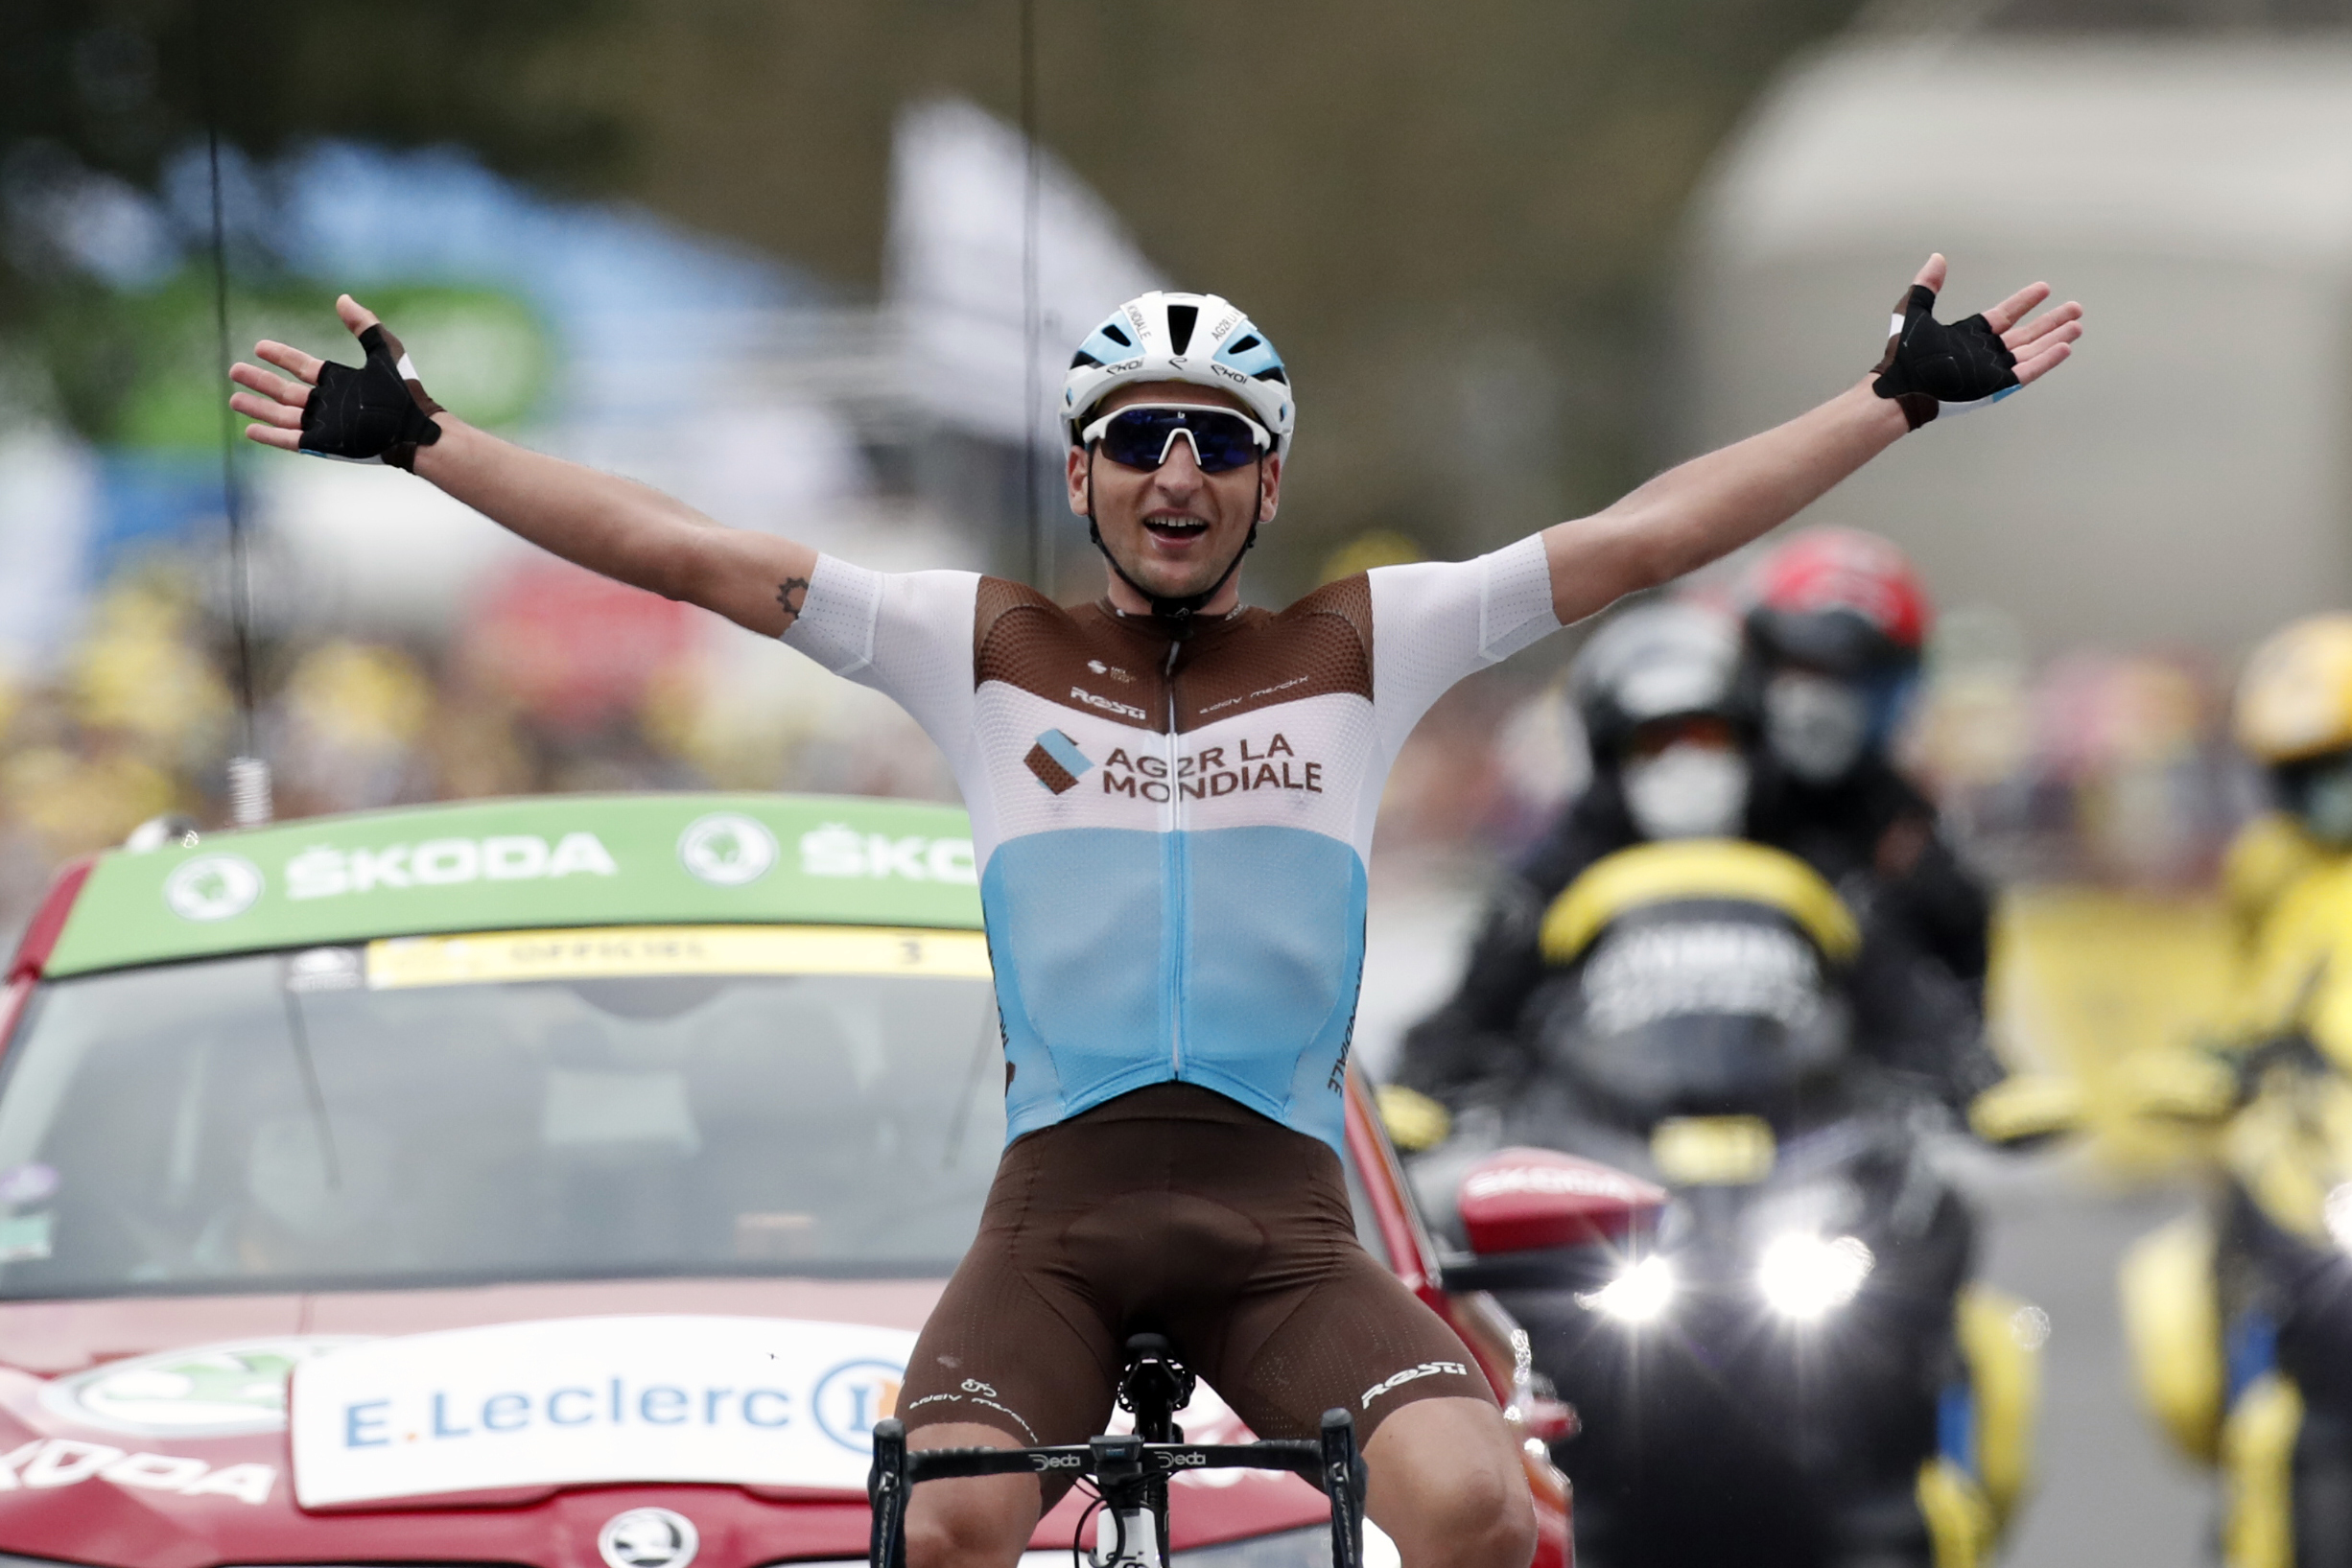 Nans Peters wins 8th stage of Tour de France, Yates still leader - The ...